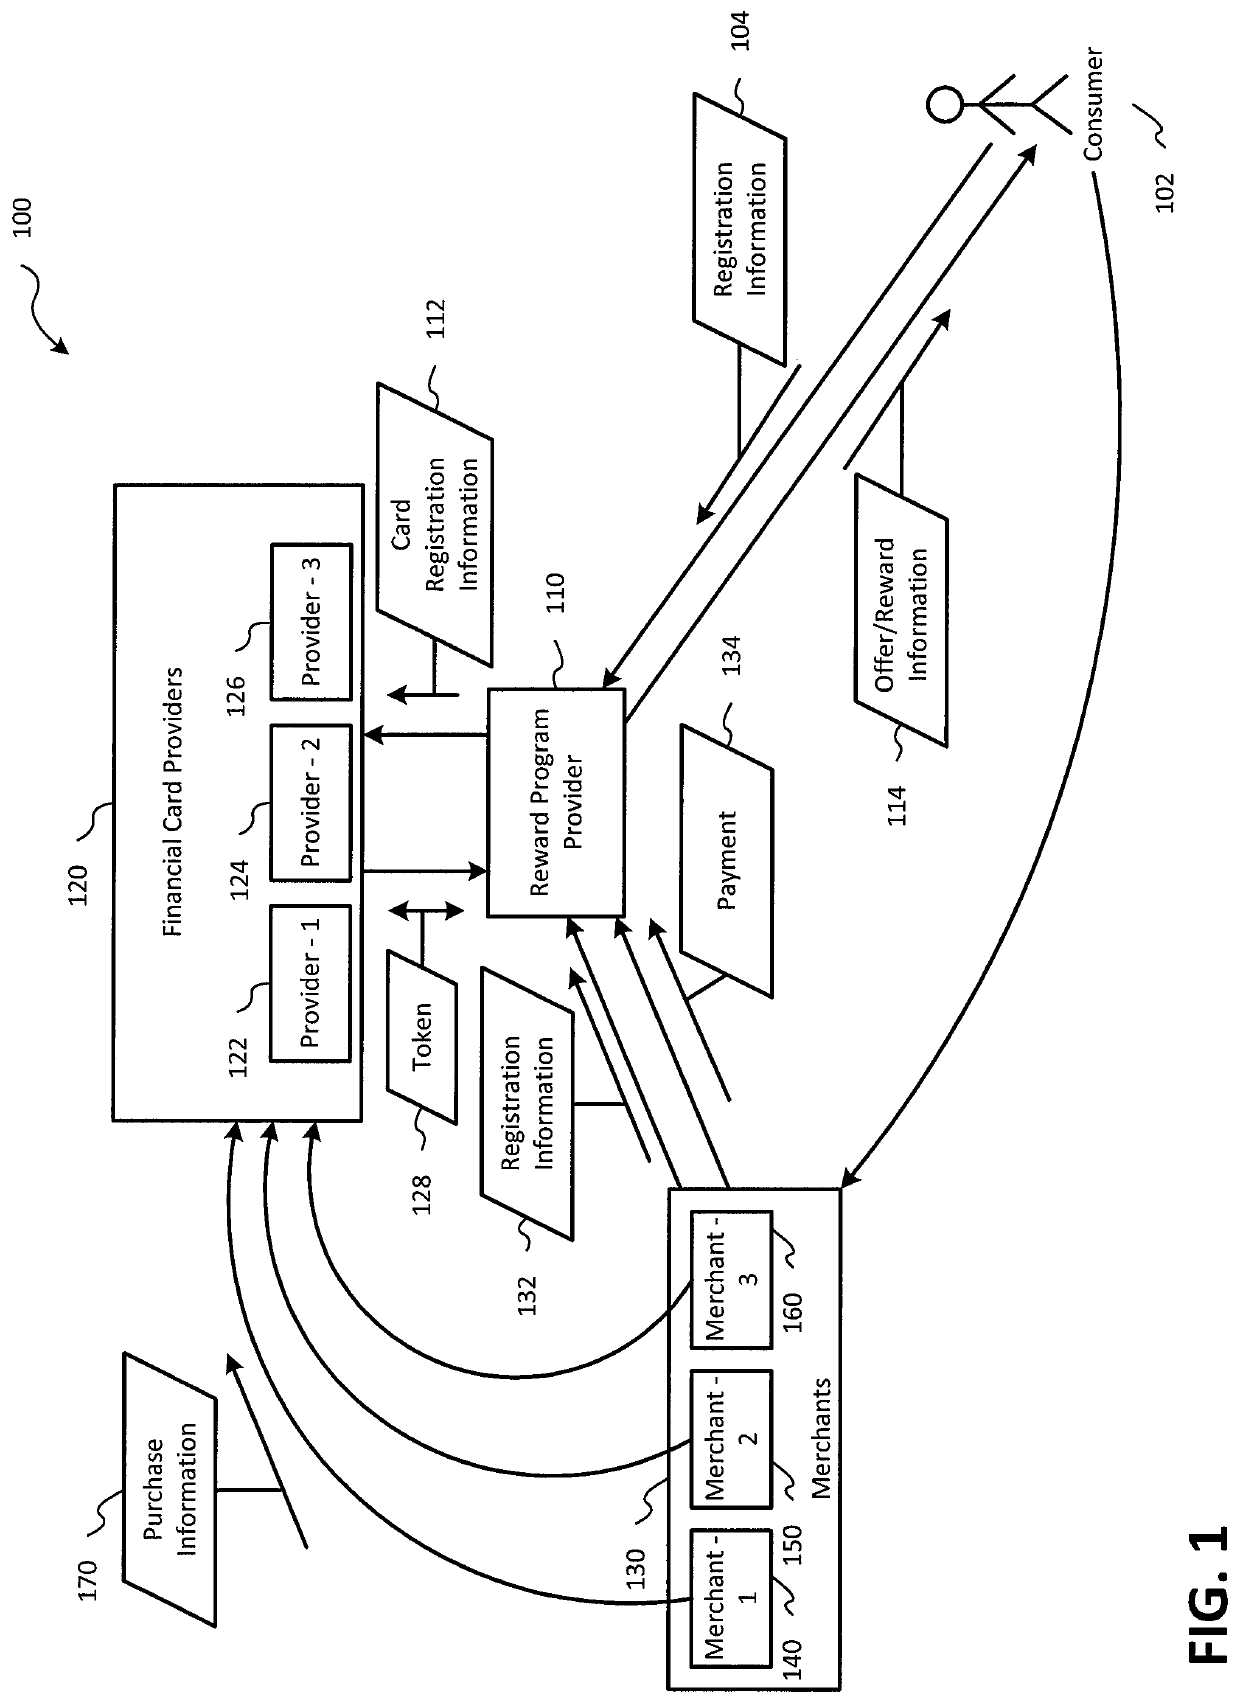 Systems and methods for discounting the price of goods and services to a consumer based on purchases made by the consumer at a plurality of merchants using a plurality of financial cards